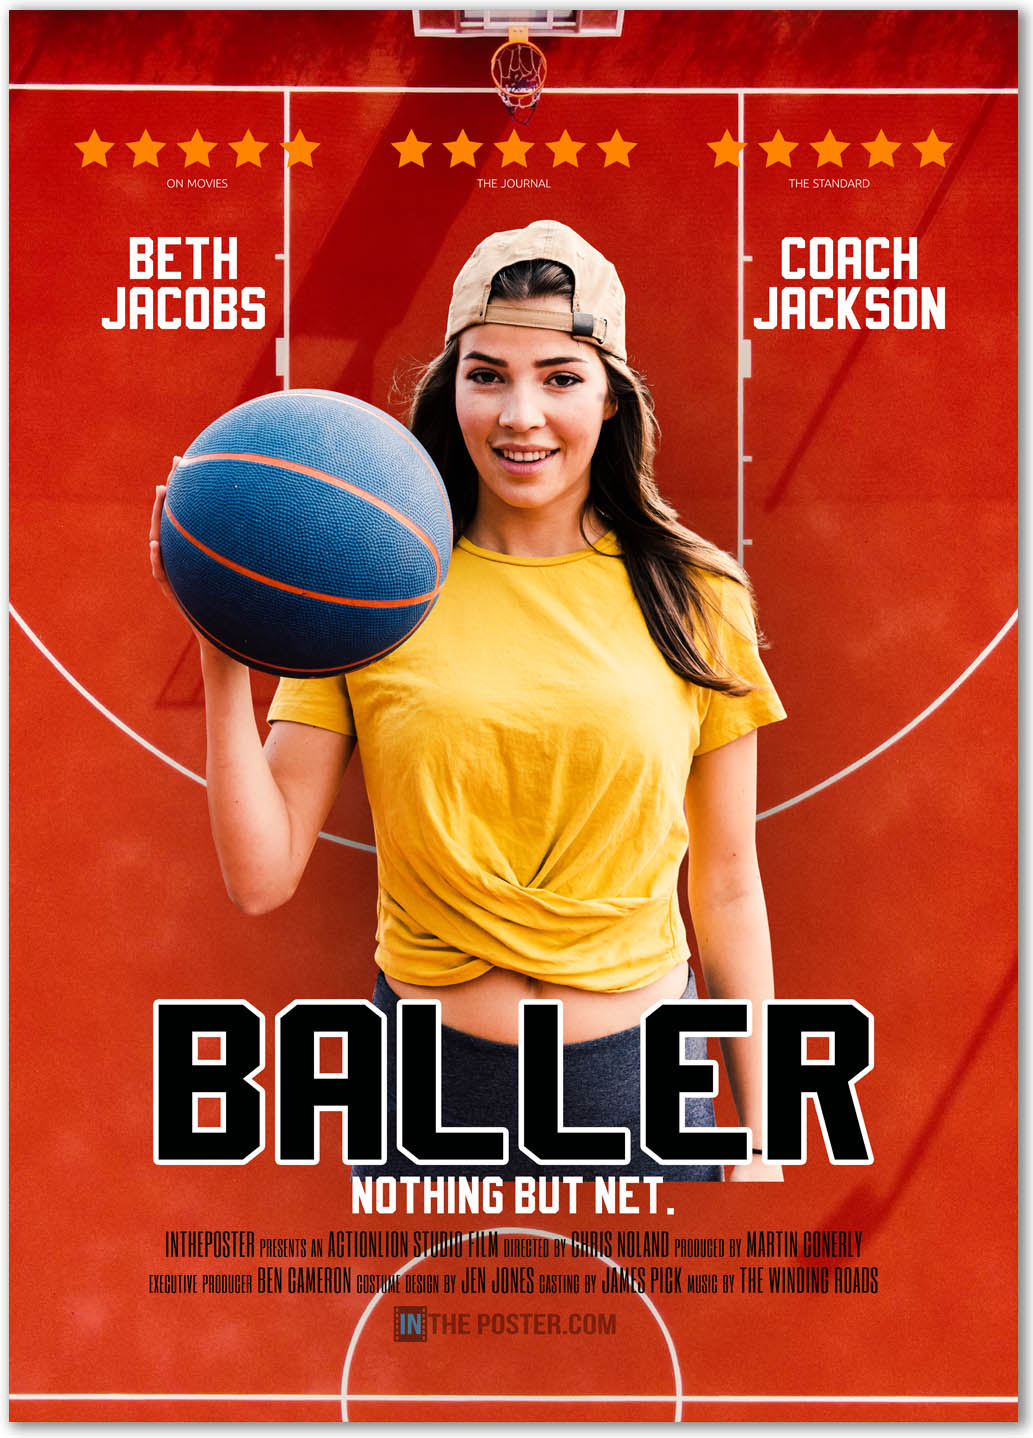 Custom basketball movie poster featuring a woman in a yellow t-shirt dribbling a blue and orange basketball. The background is a basketball court.